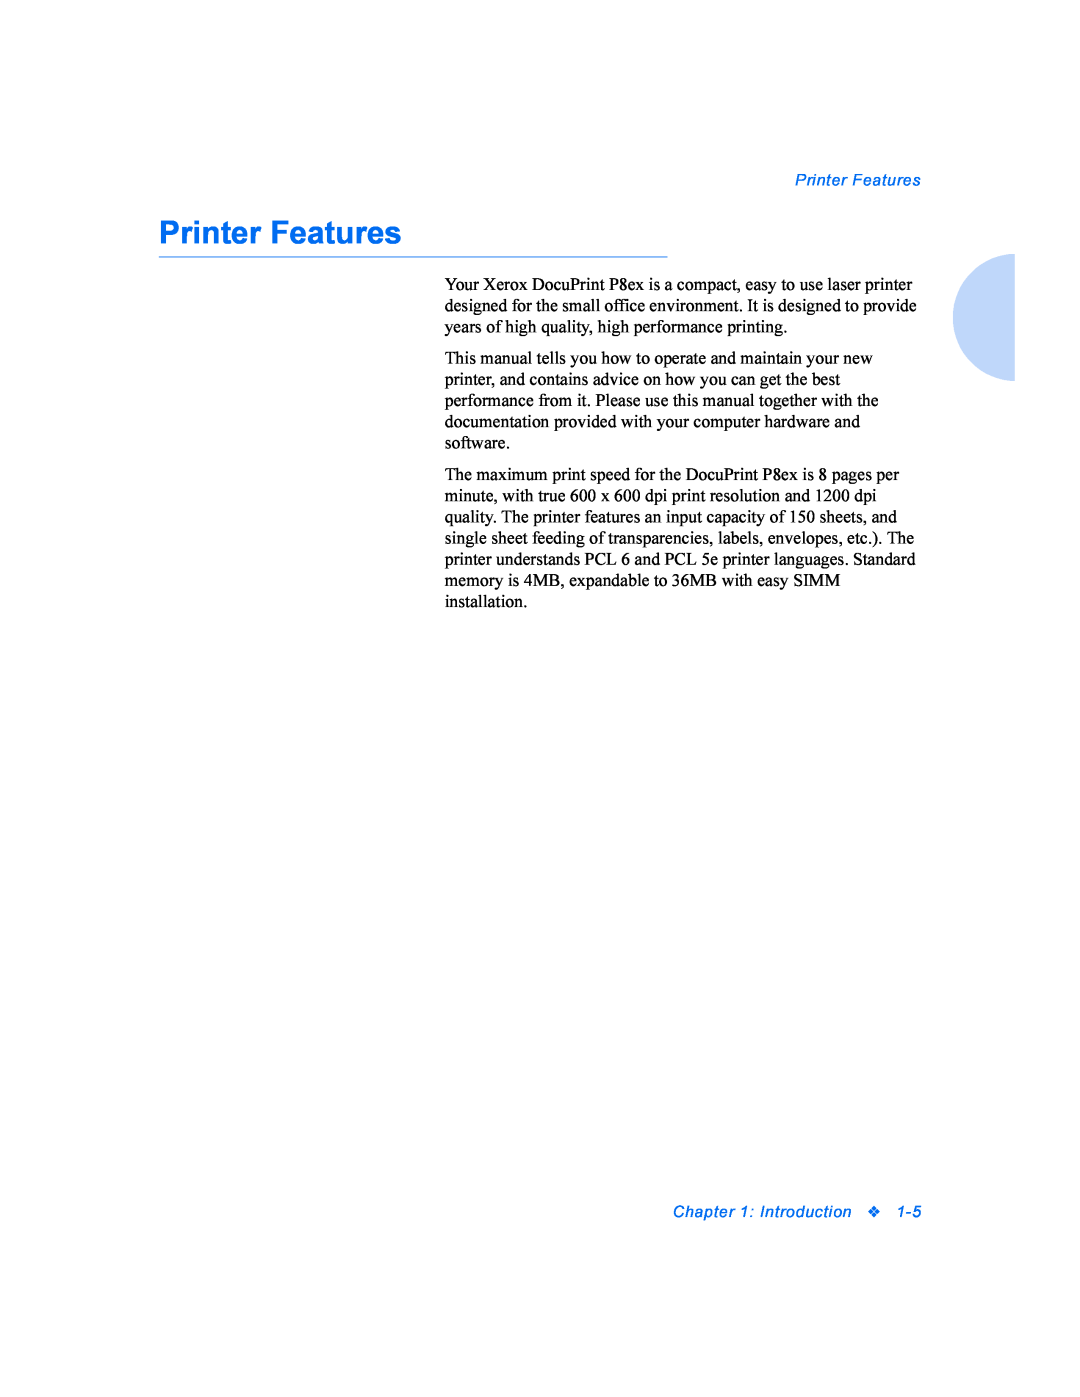 Xerox P8EX manual Printer Features, Introduction 